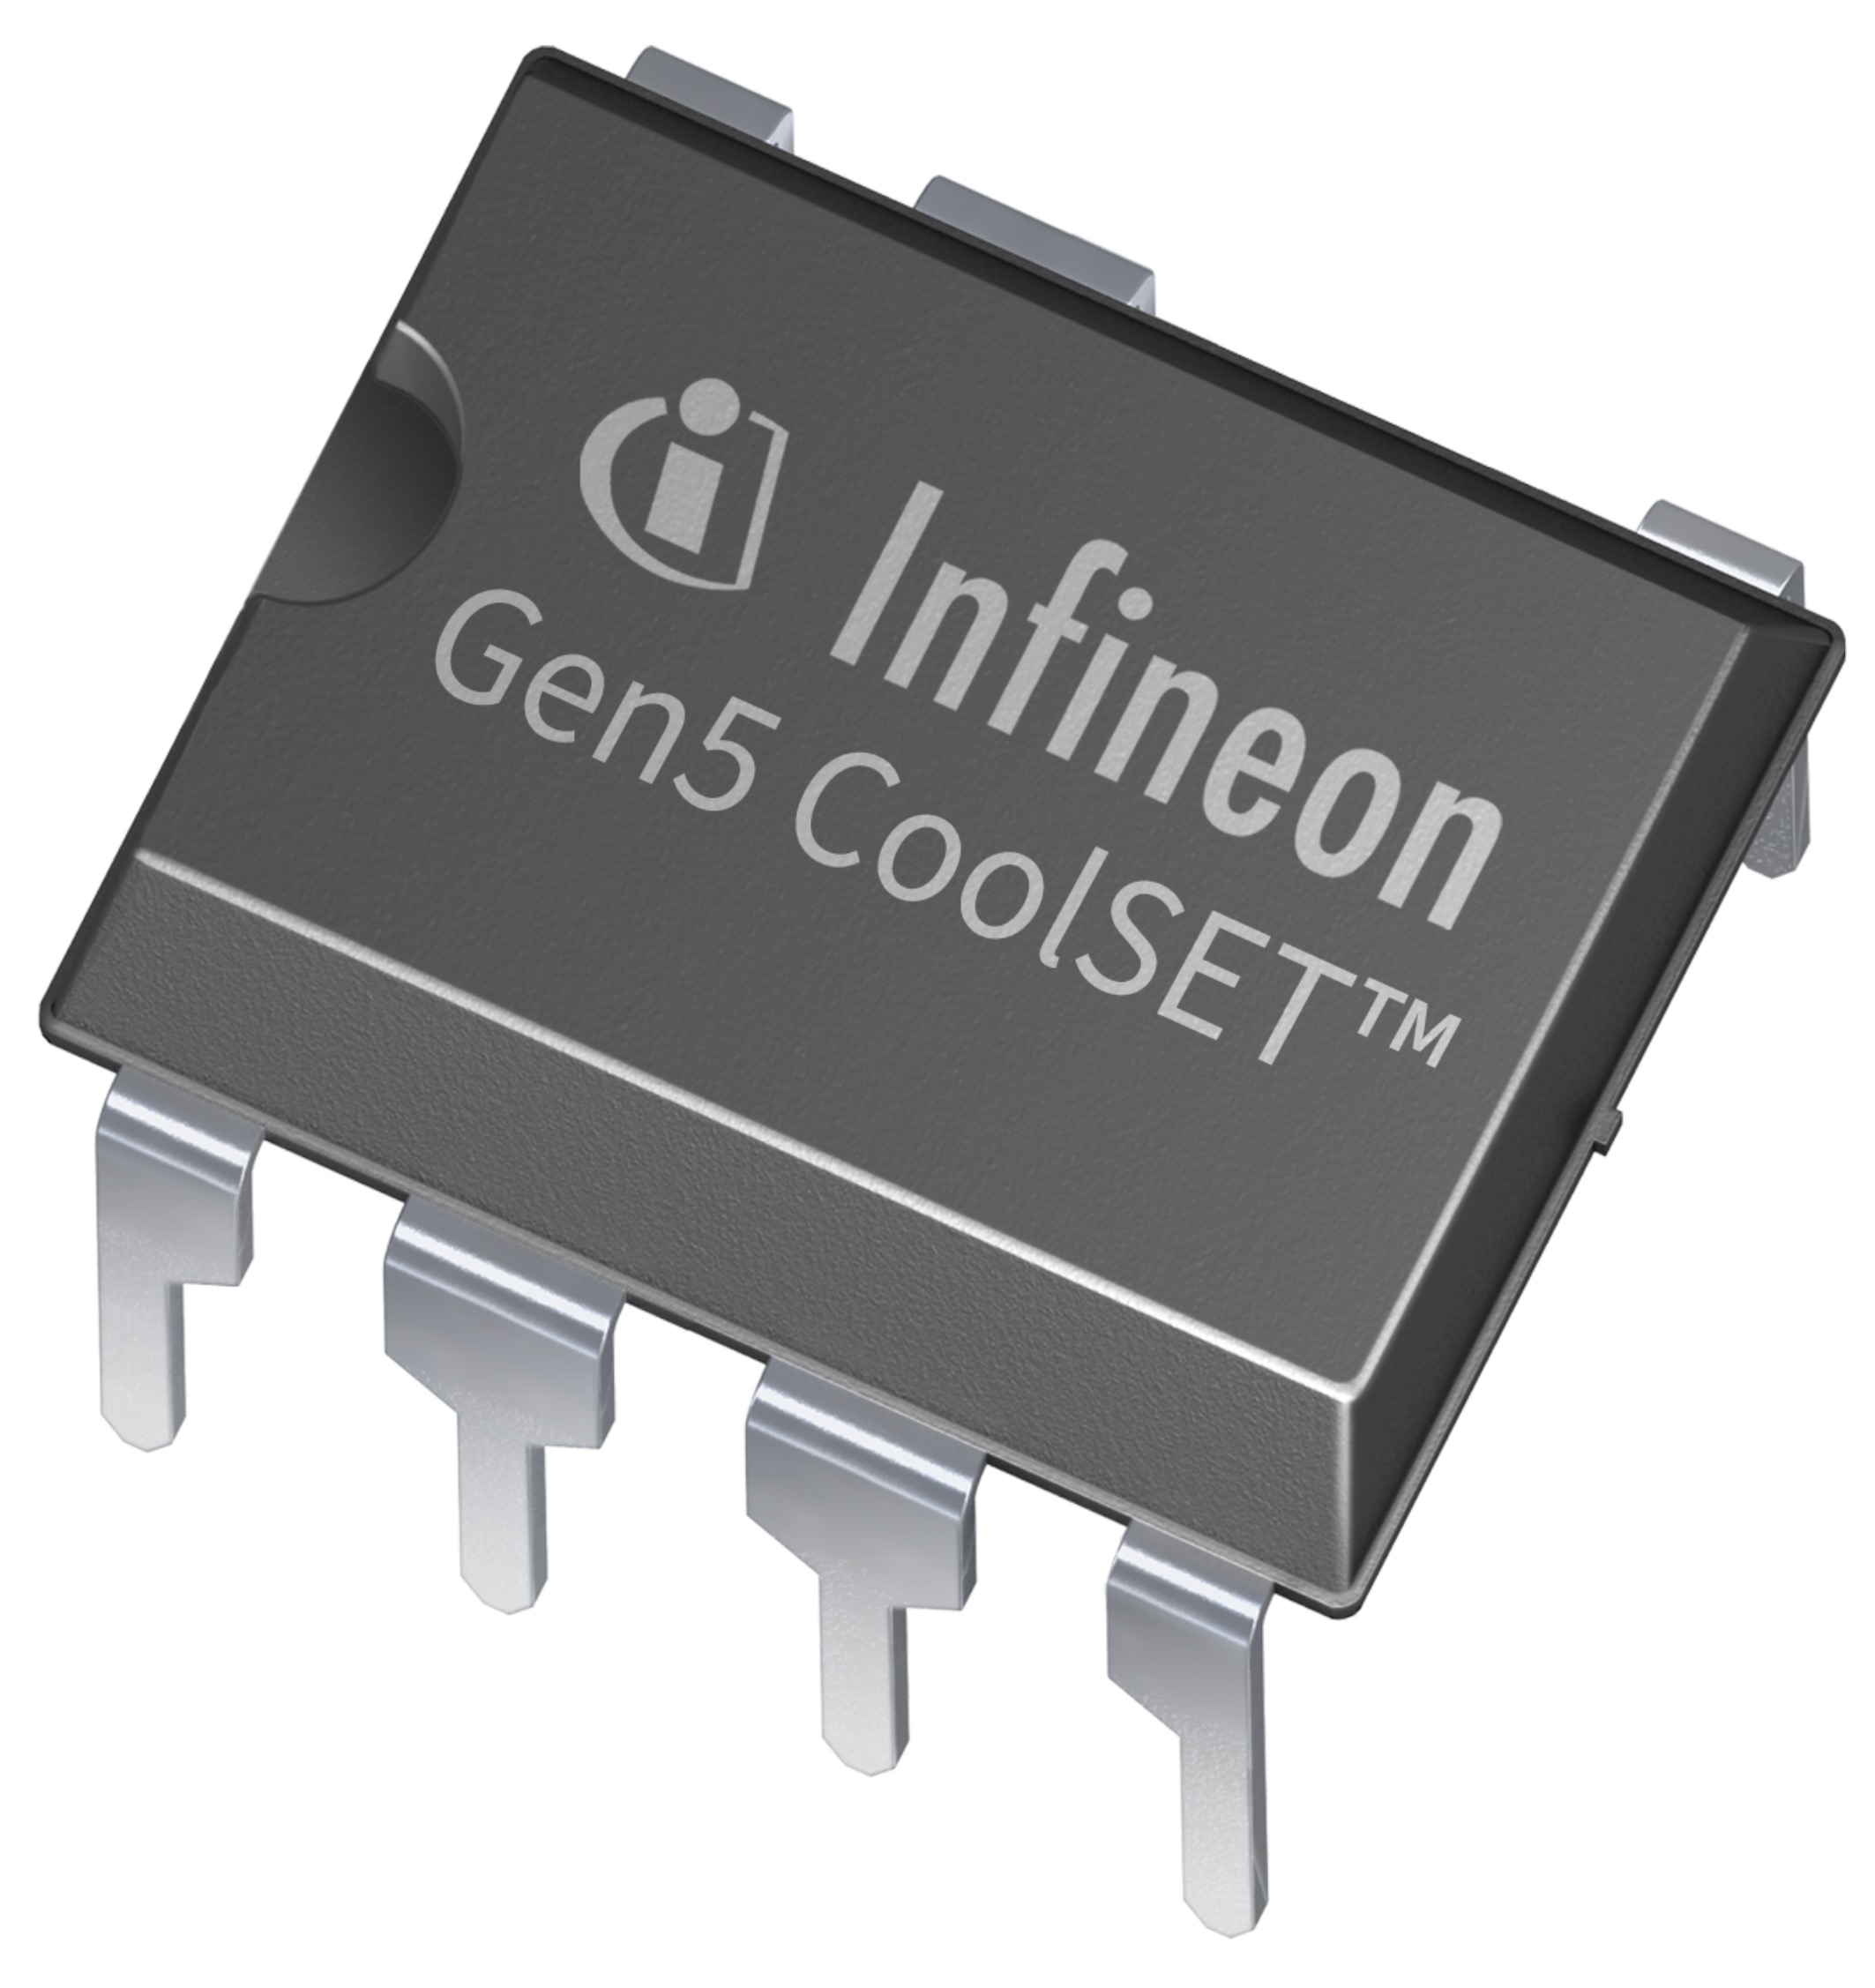 800 V and 950 V AC-DC Integrated Power Stages Expand the Fixed-Frequency CoolSET Portfolio